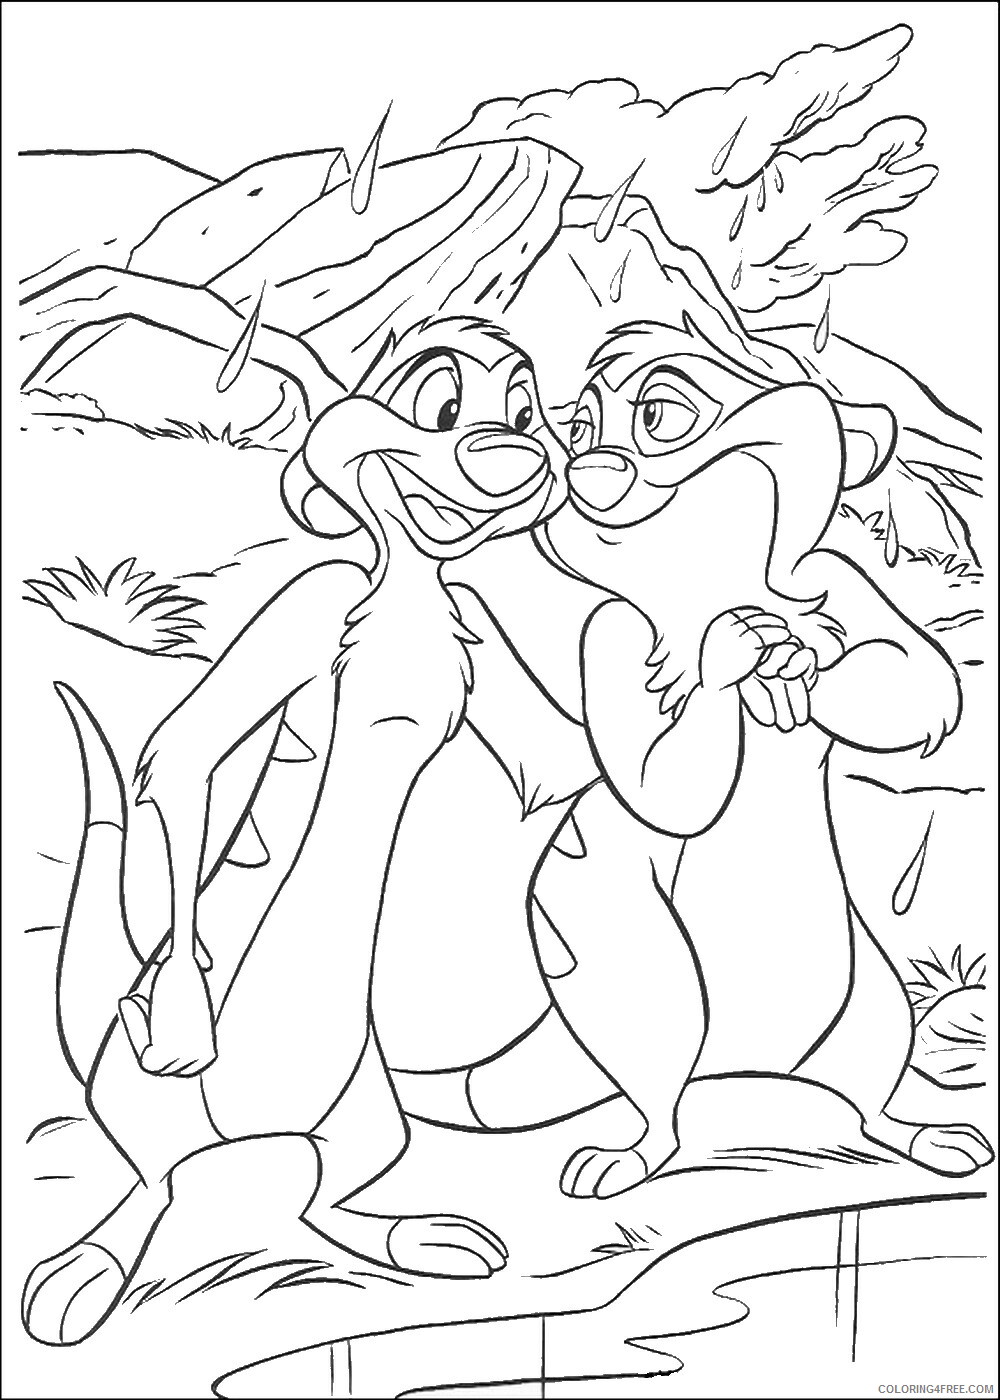 The Lion King Coloring Pages TV Film lionking_107 Printable 2020 09147 Coloring4free